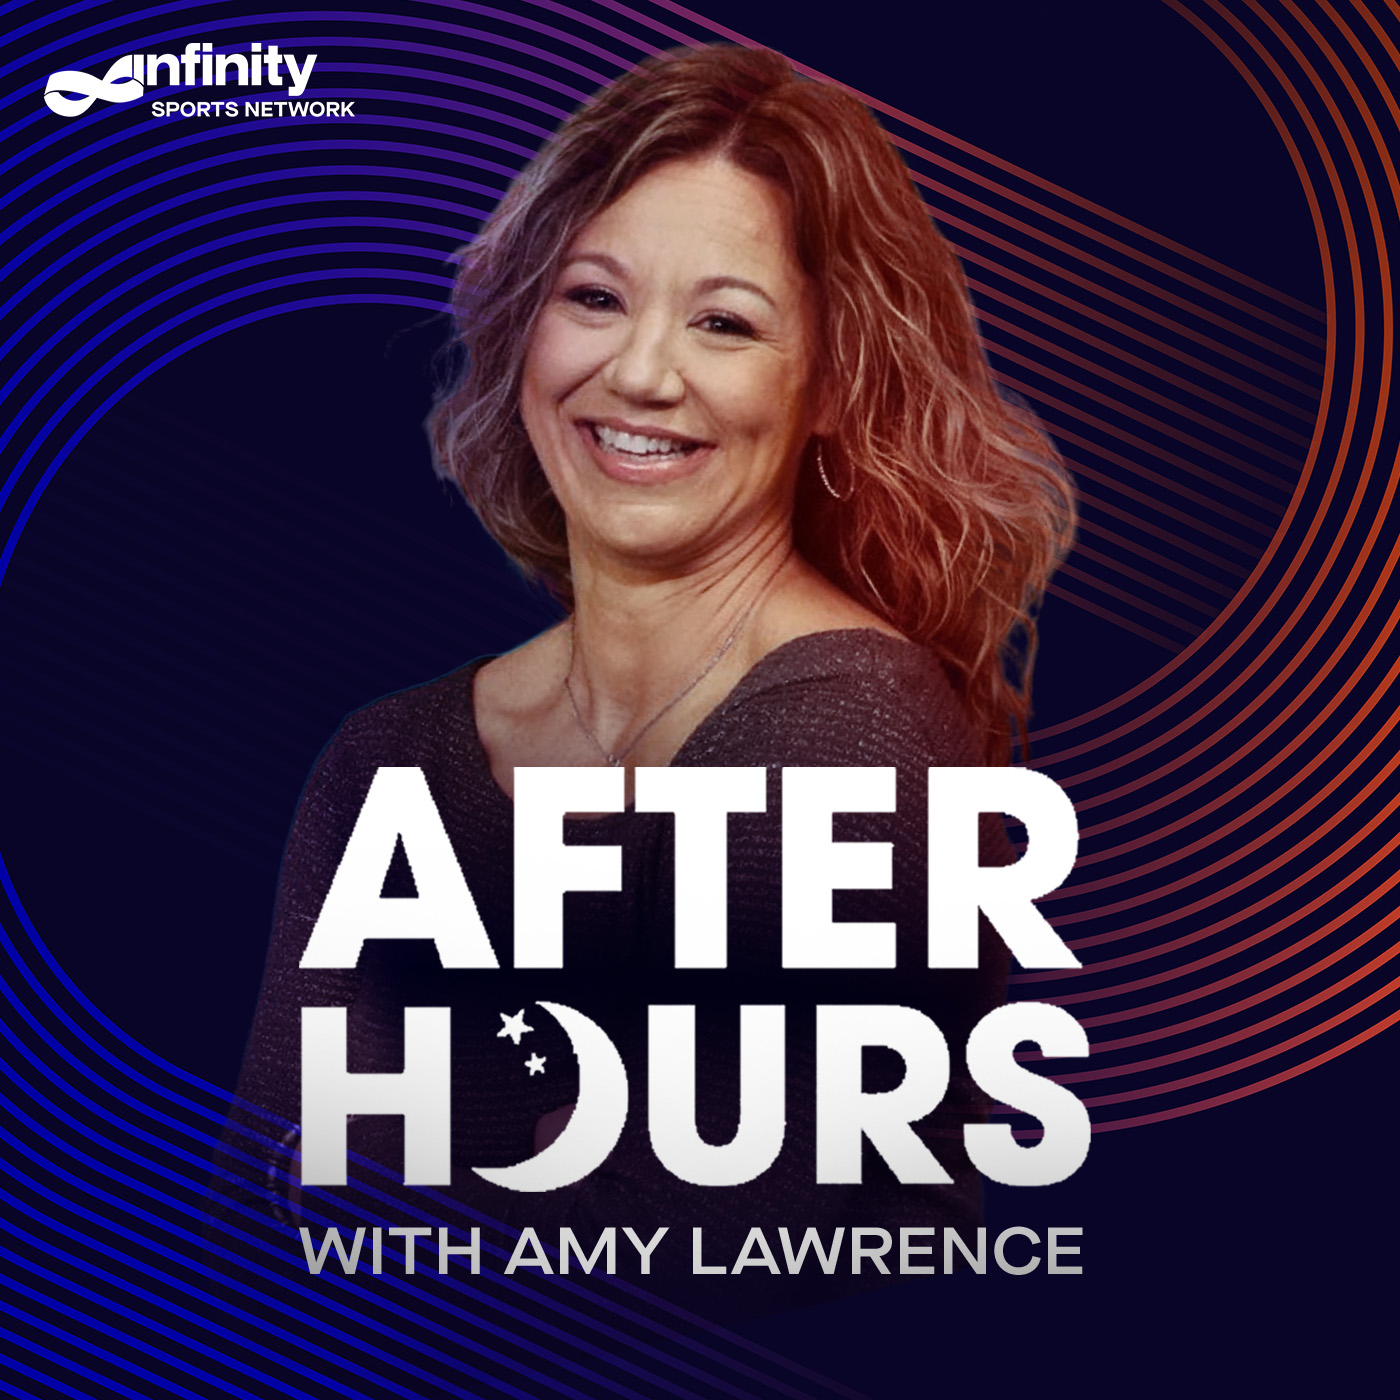 4/29/21 After Hours with Amy Lawrence PODCAST: Hour 4